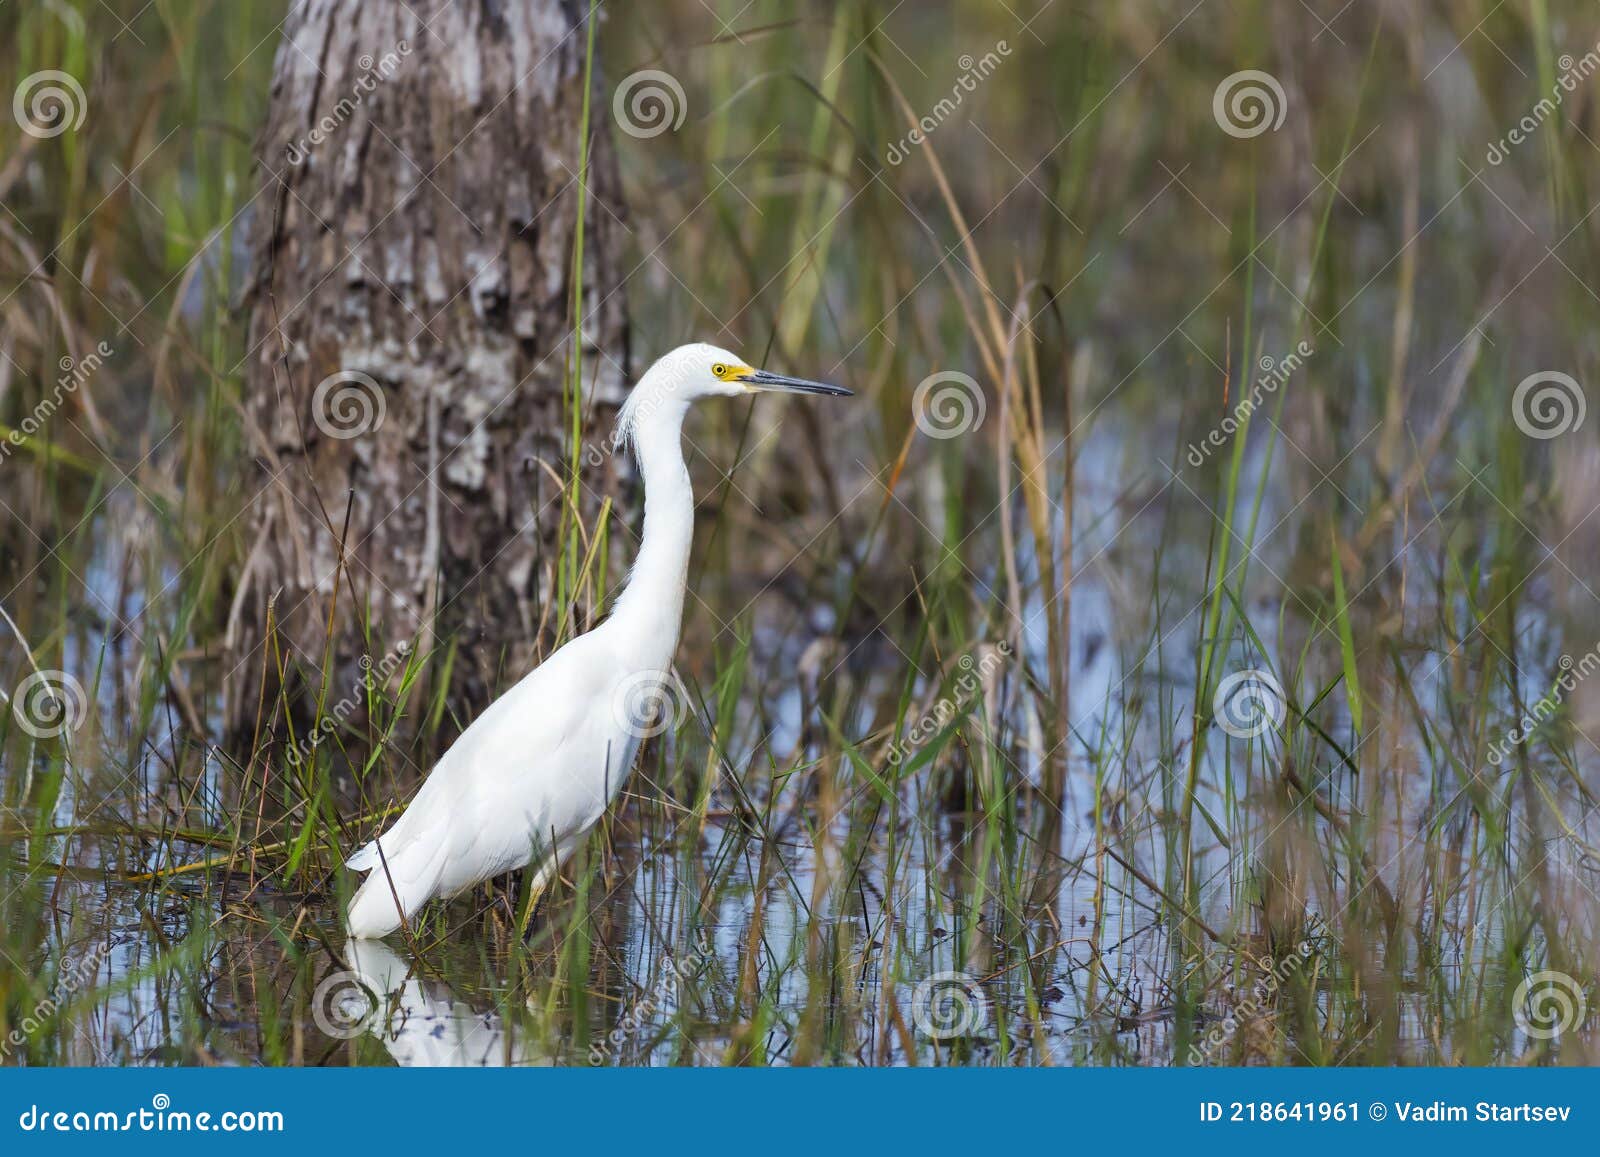 snowy egret standing in the water.big cypress national preserve.florida.usa